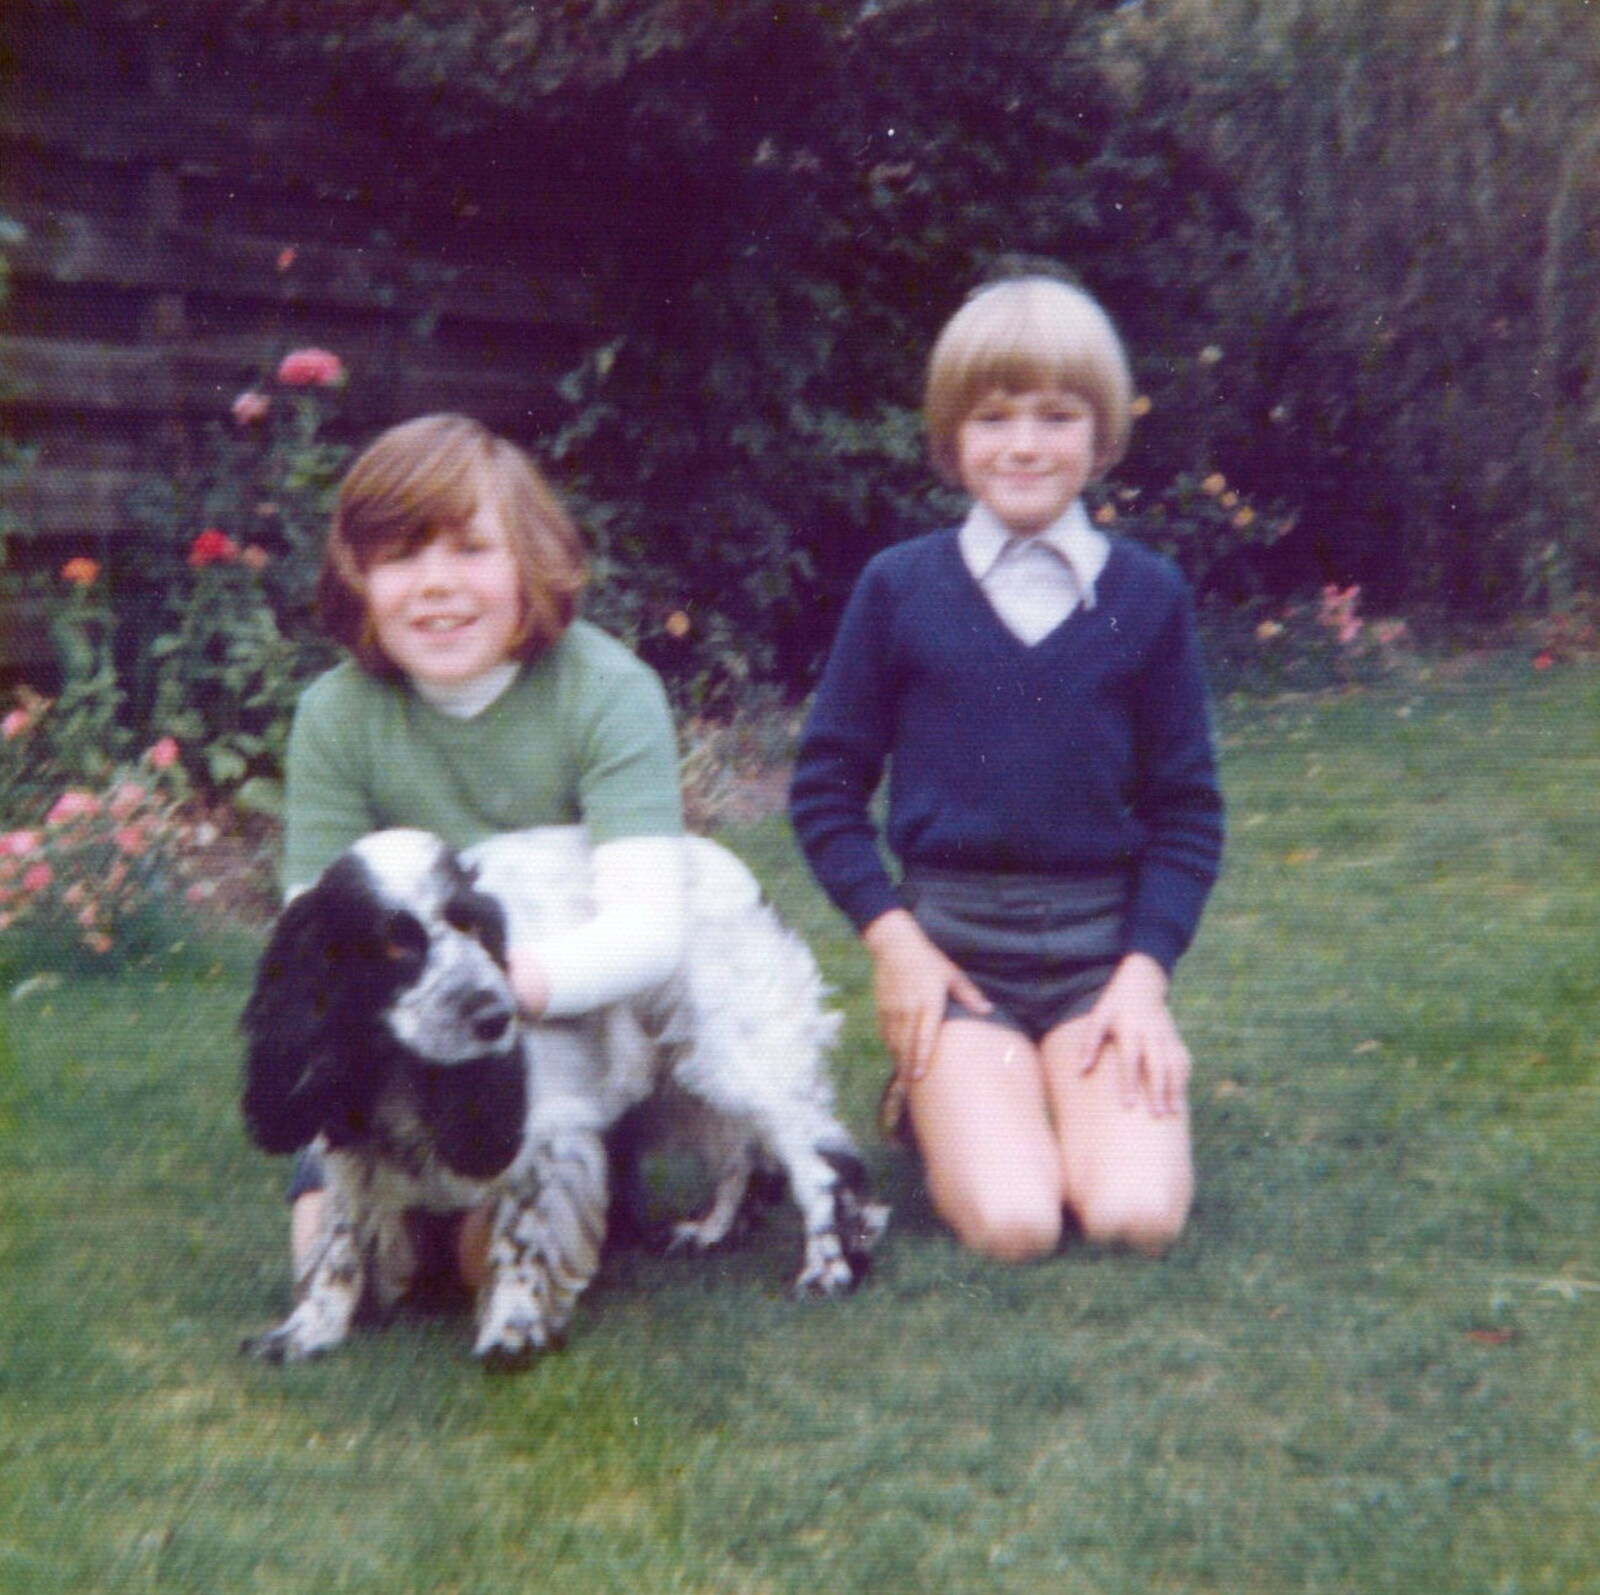 Family History: Birtle's Close, Sandbach, Cheshire - 24th January 2020: In the garden with Bob the spaniel